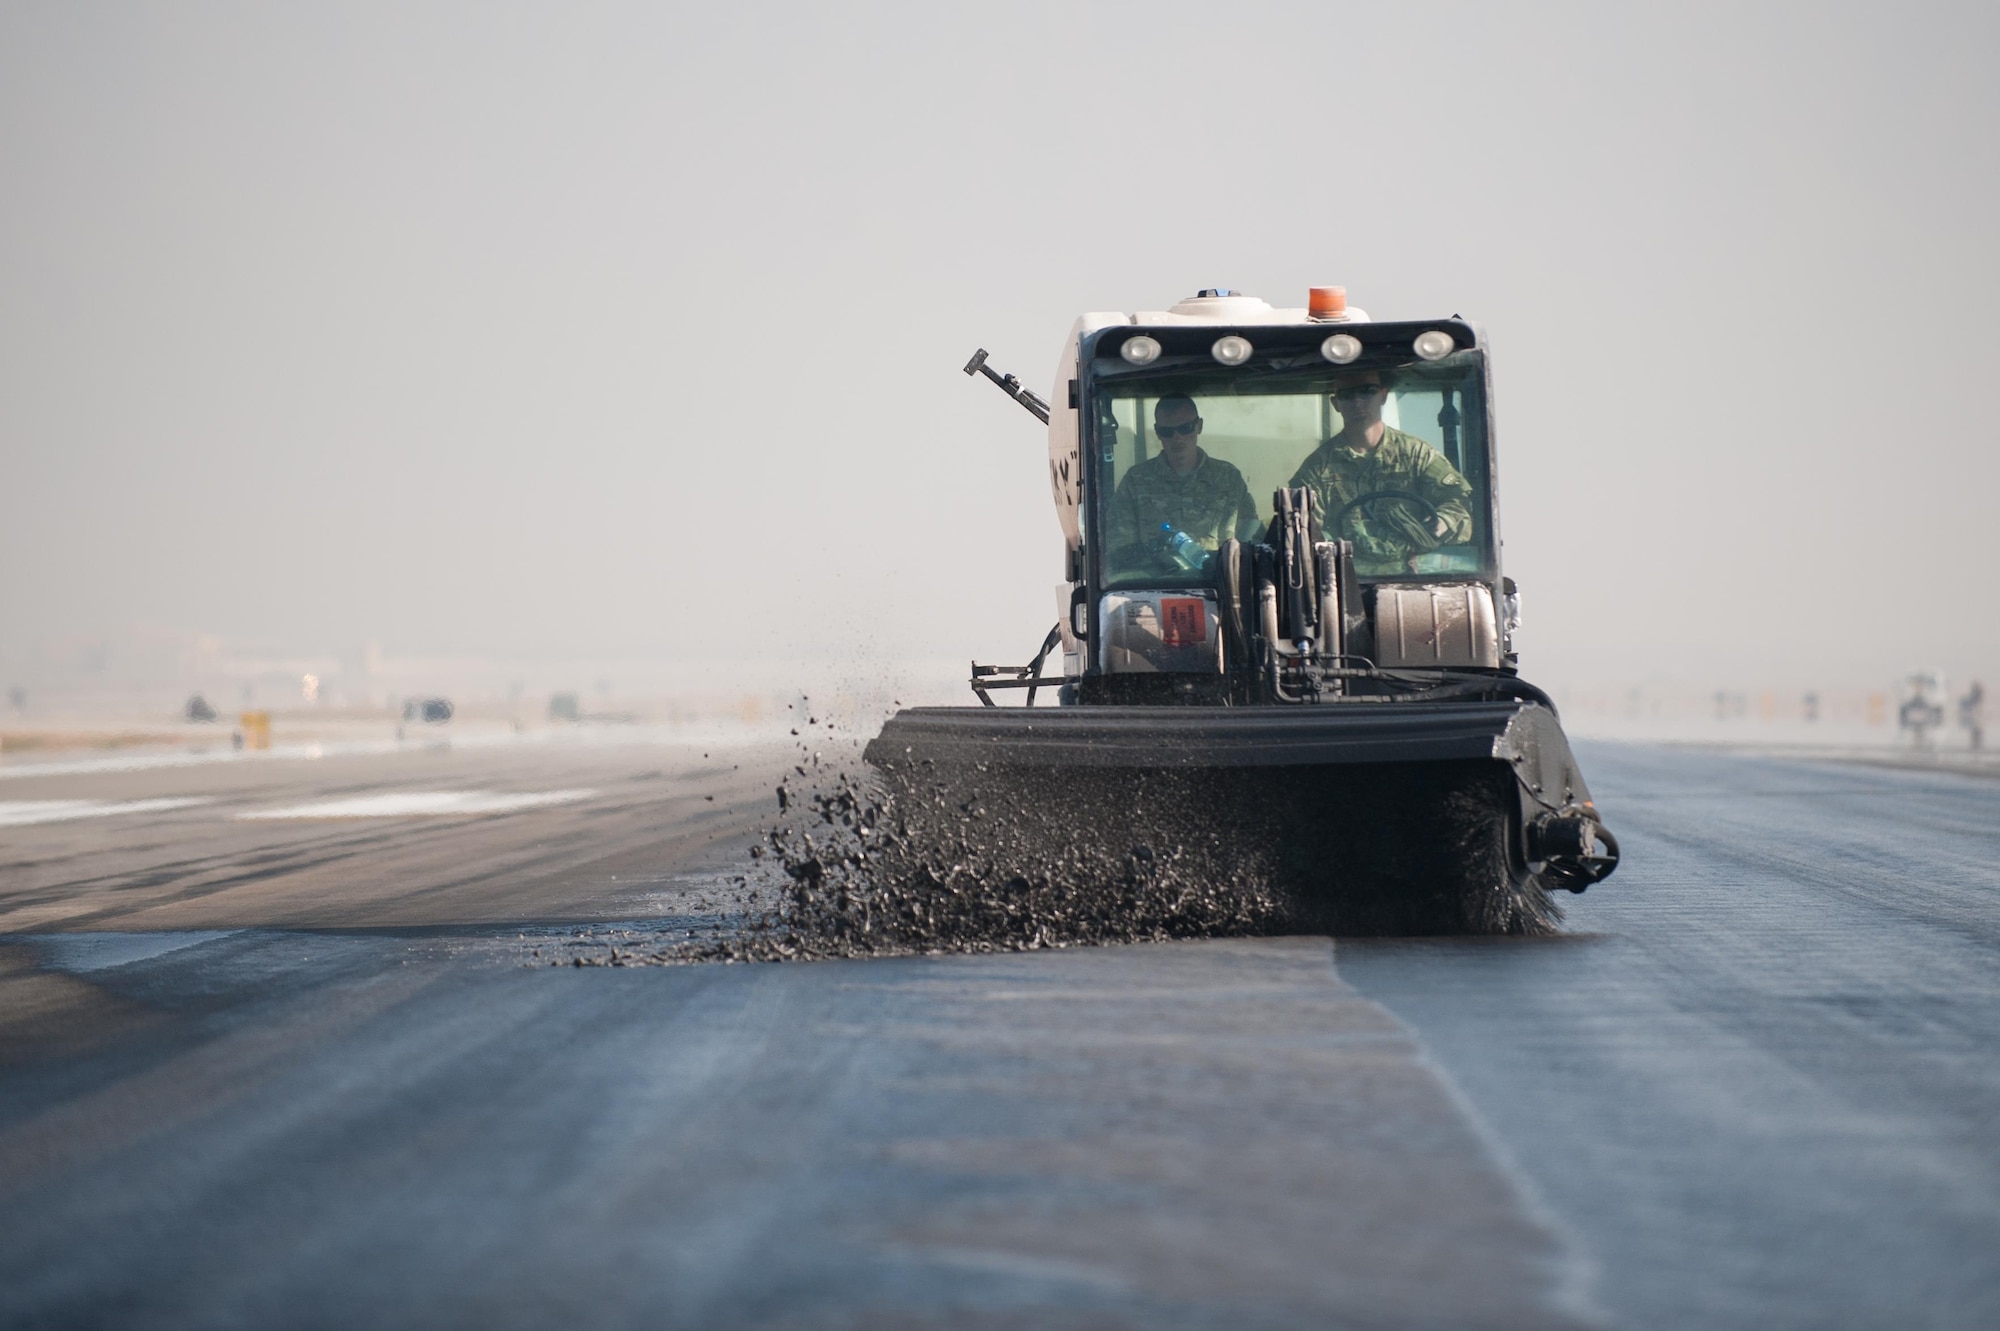 Airmen from the 577th Expeditionary Prime Base Engineer Emergency Force Squadron out of Al Udeid Air Base, Qatar, remove rubber from the runway Oct. 22, 2015, at Bagram Airfield, Afghanistan. Foam and biodegradable solvents are used to strip the rubber left behind by the aircraft that land or take off from Bagram in support of Operation Freedom’s Sentinel and NATO’s Resolute Support mission. (U.S. Air Force photo/Tech. Sgt. Joseph Swafford) 